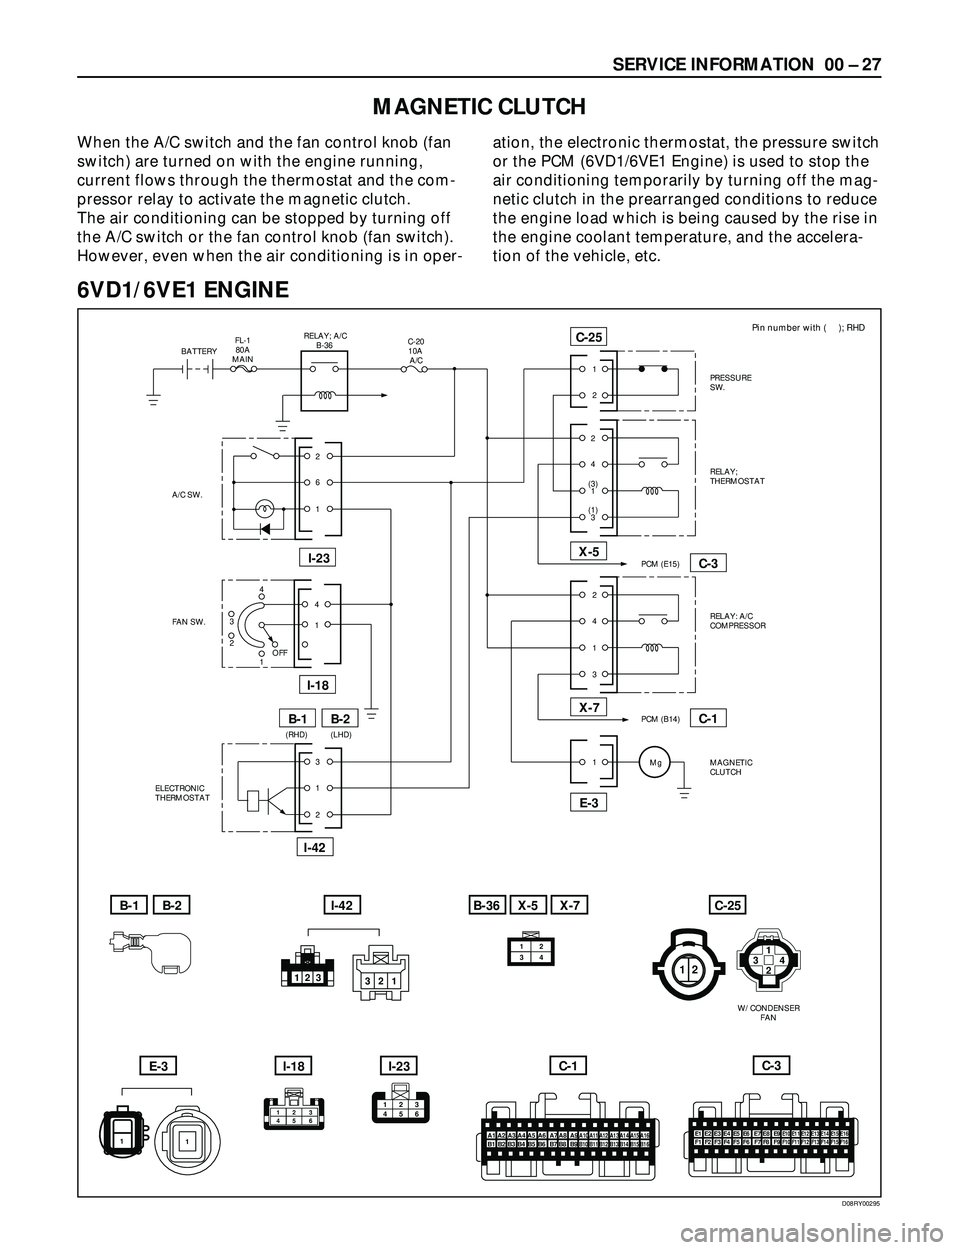 ISUZU TROOPER 1998  Service Repair Manual SERVICE INFORMATION  00 Ð 27
MAGNETIC CLUTCH
When the A/C switch and the fan control knob (fan
switch) are turned on with the engine running,
current flows through the thermostat and the com-
pressor